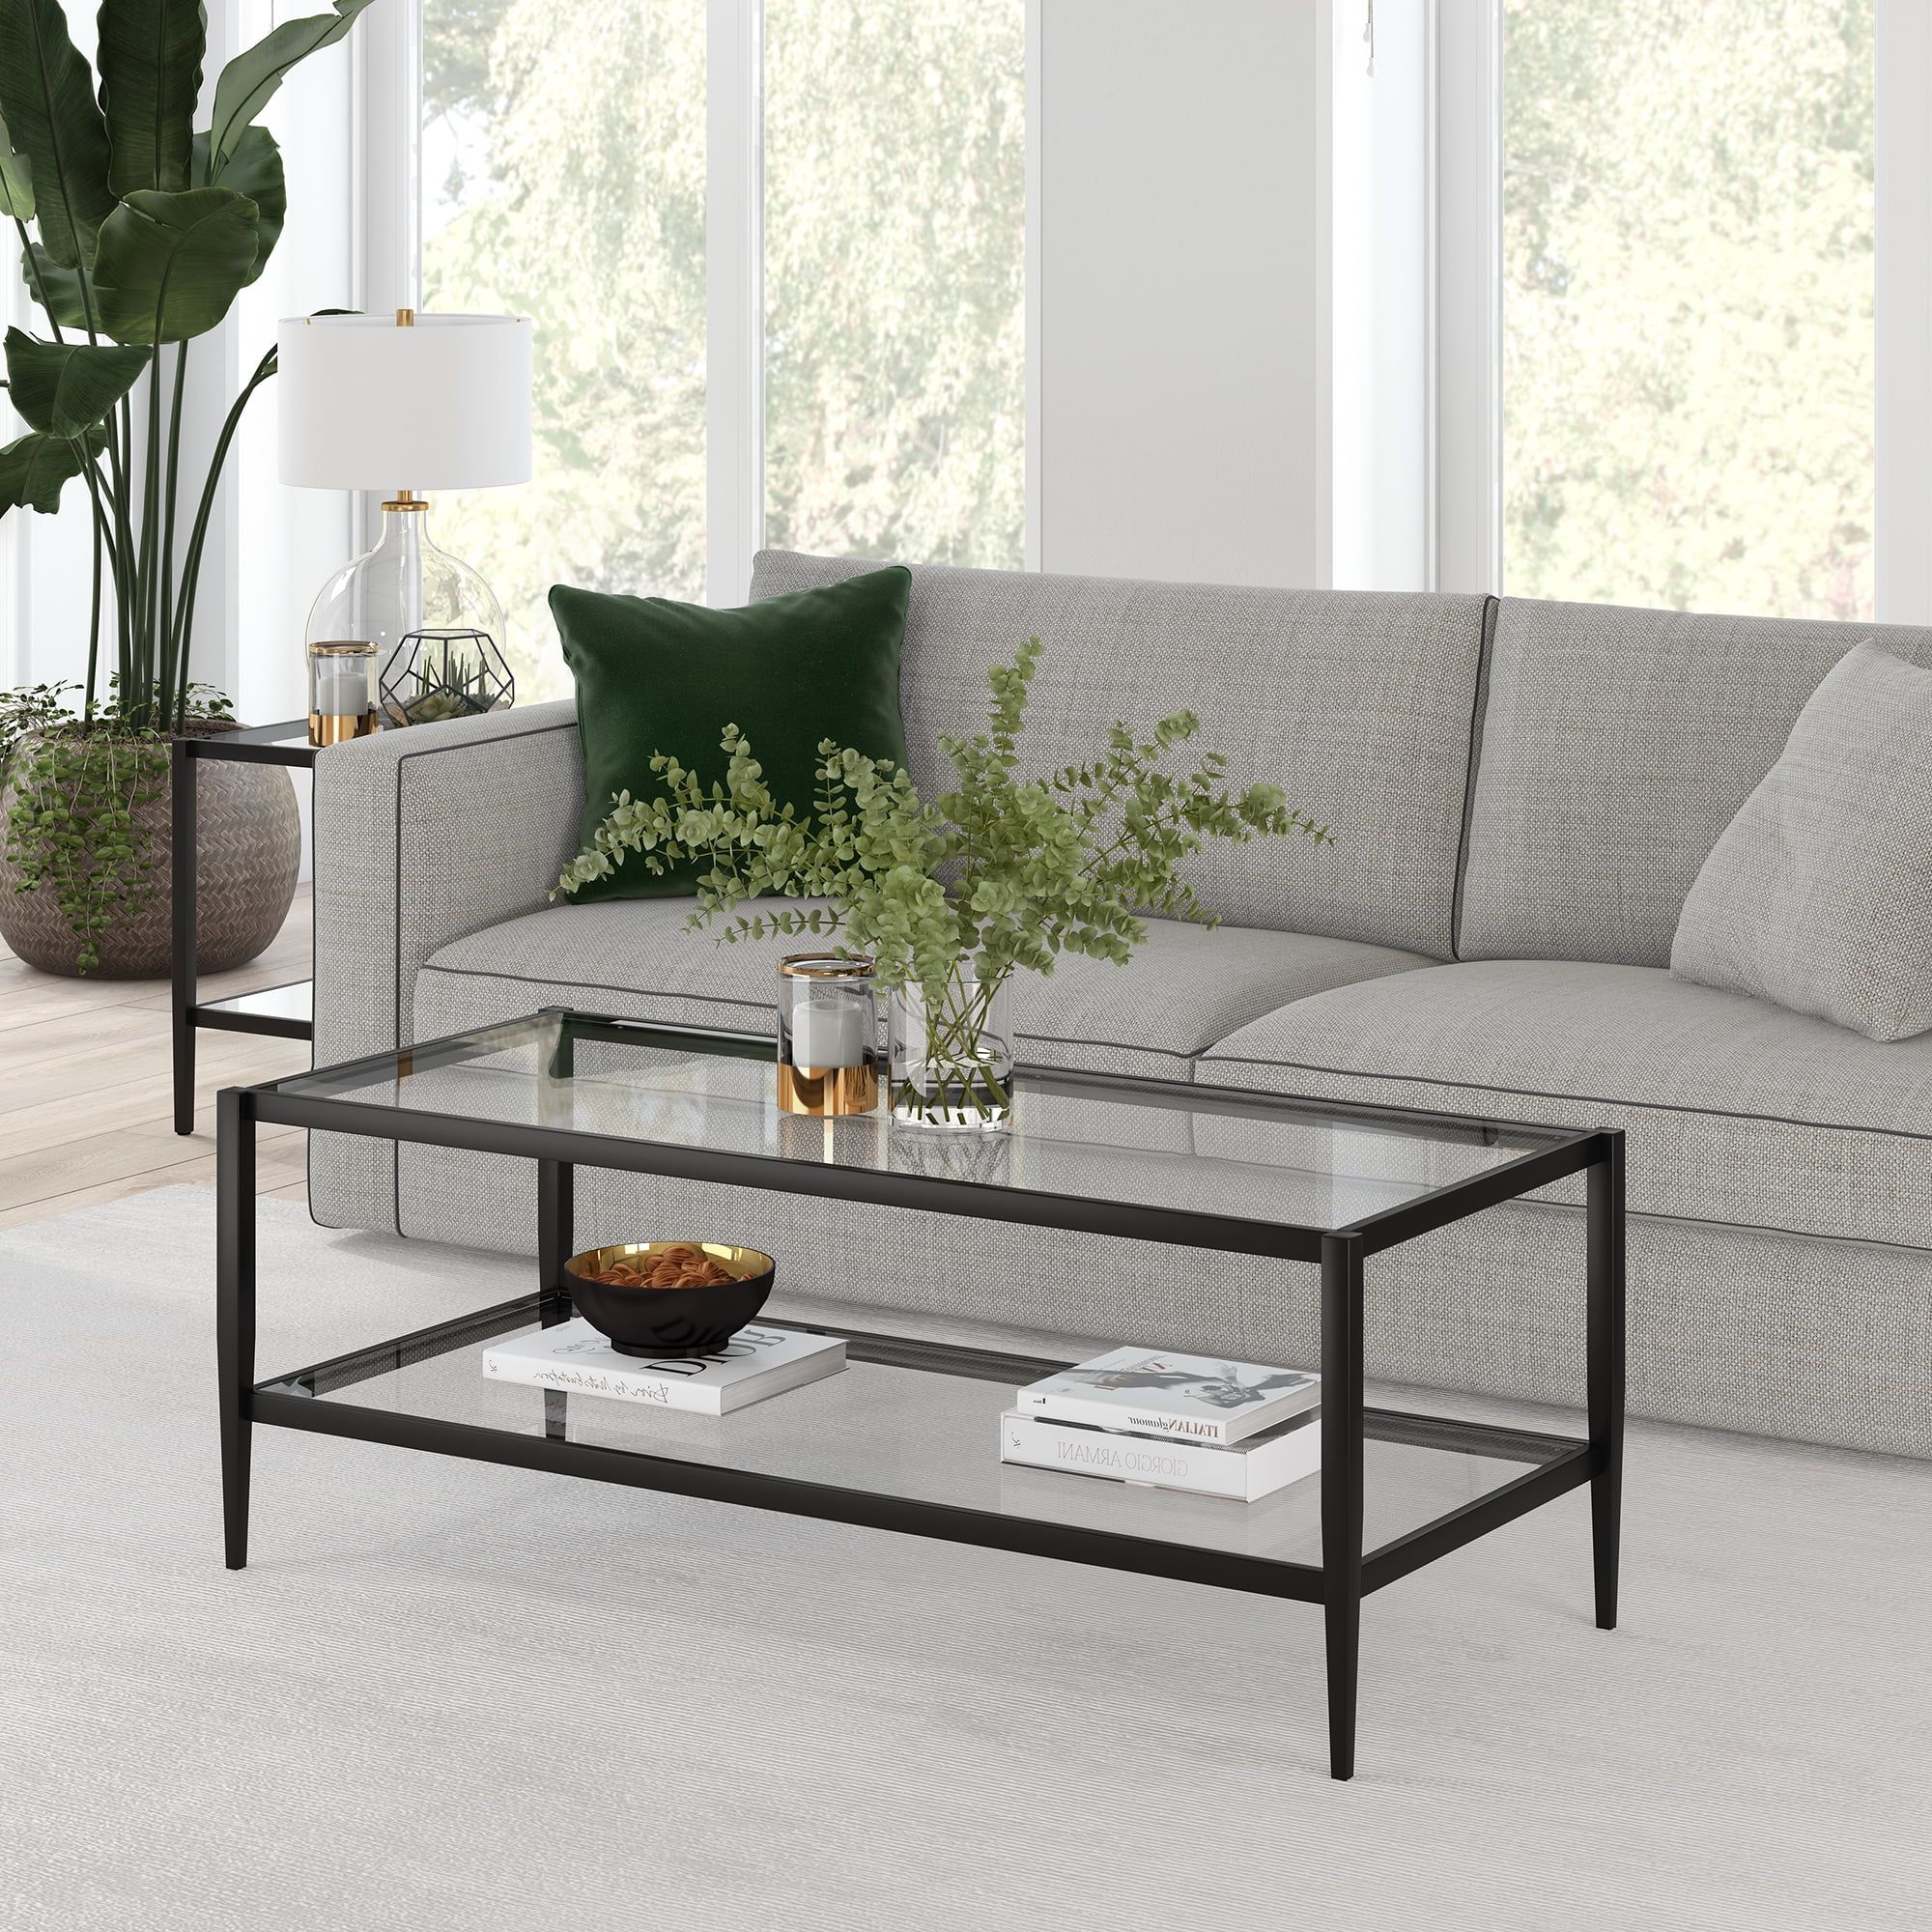 Recent Rectangular Coffee Tables With Pedestal Bases Regarding Modern Glass Coffee Table, Rectangular Cocktail Table In Blackened (View 8 of 15)